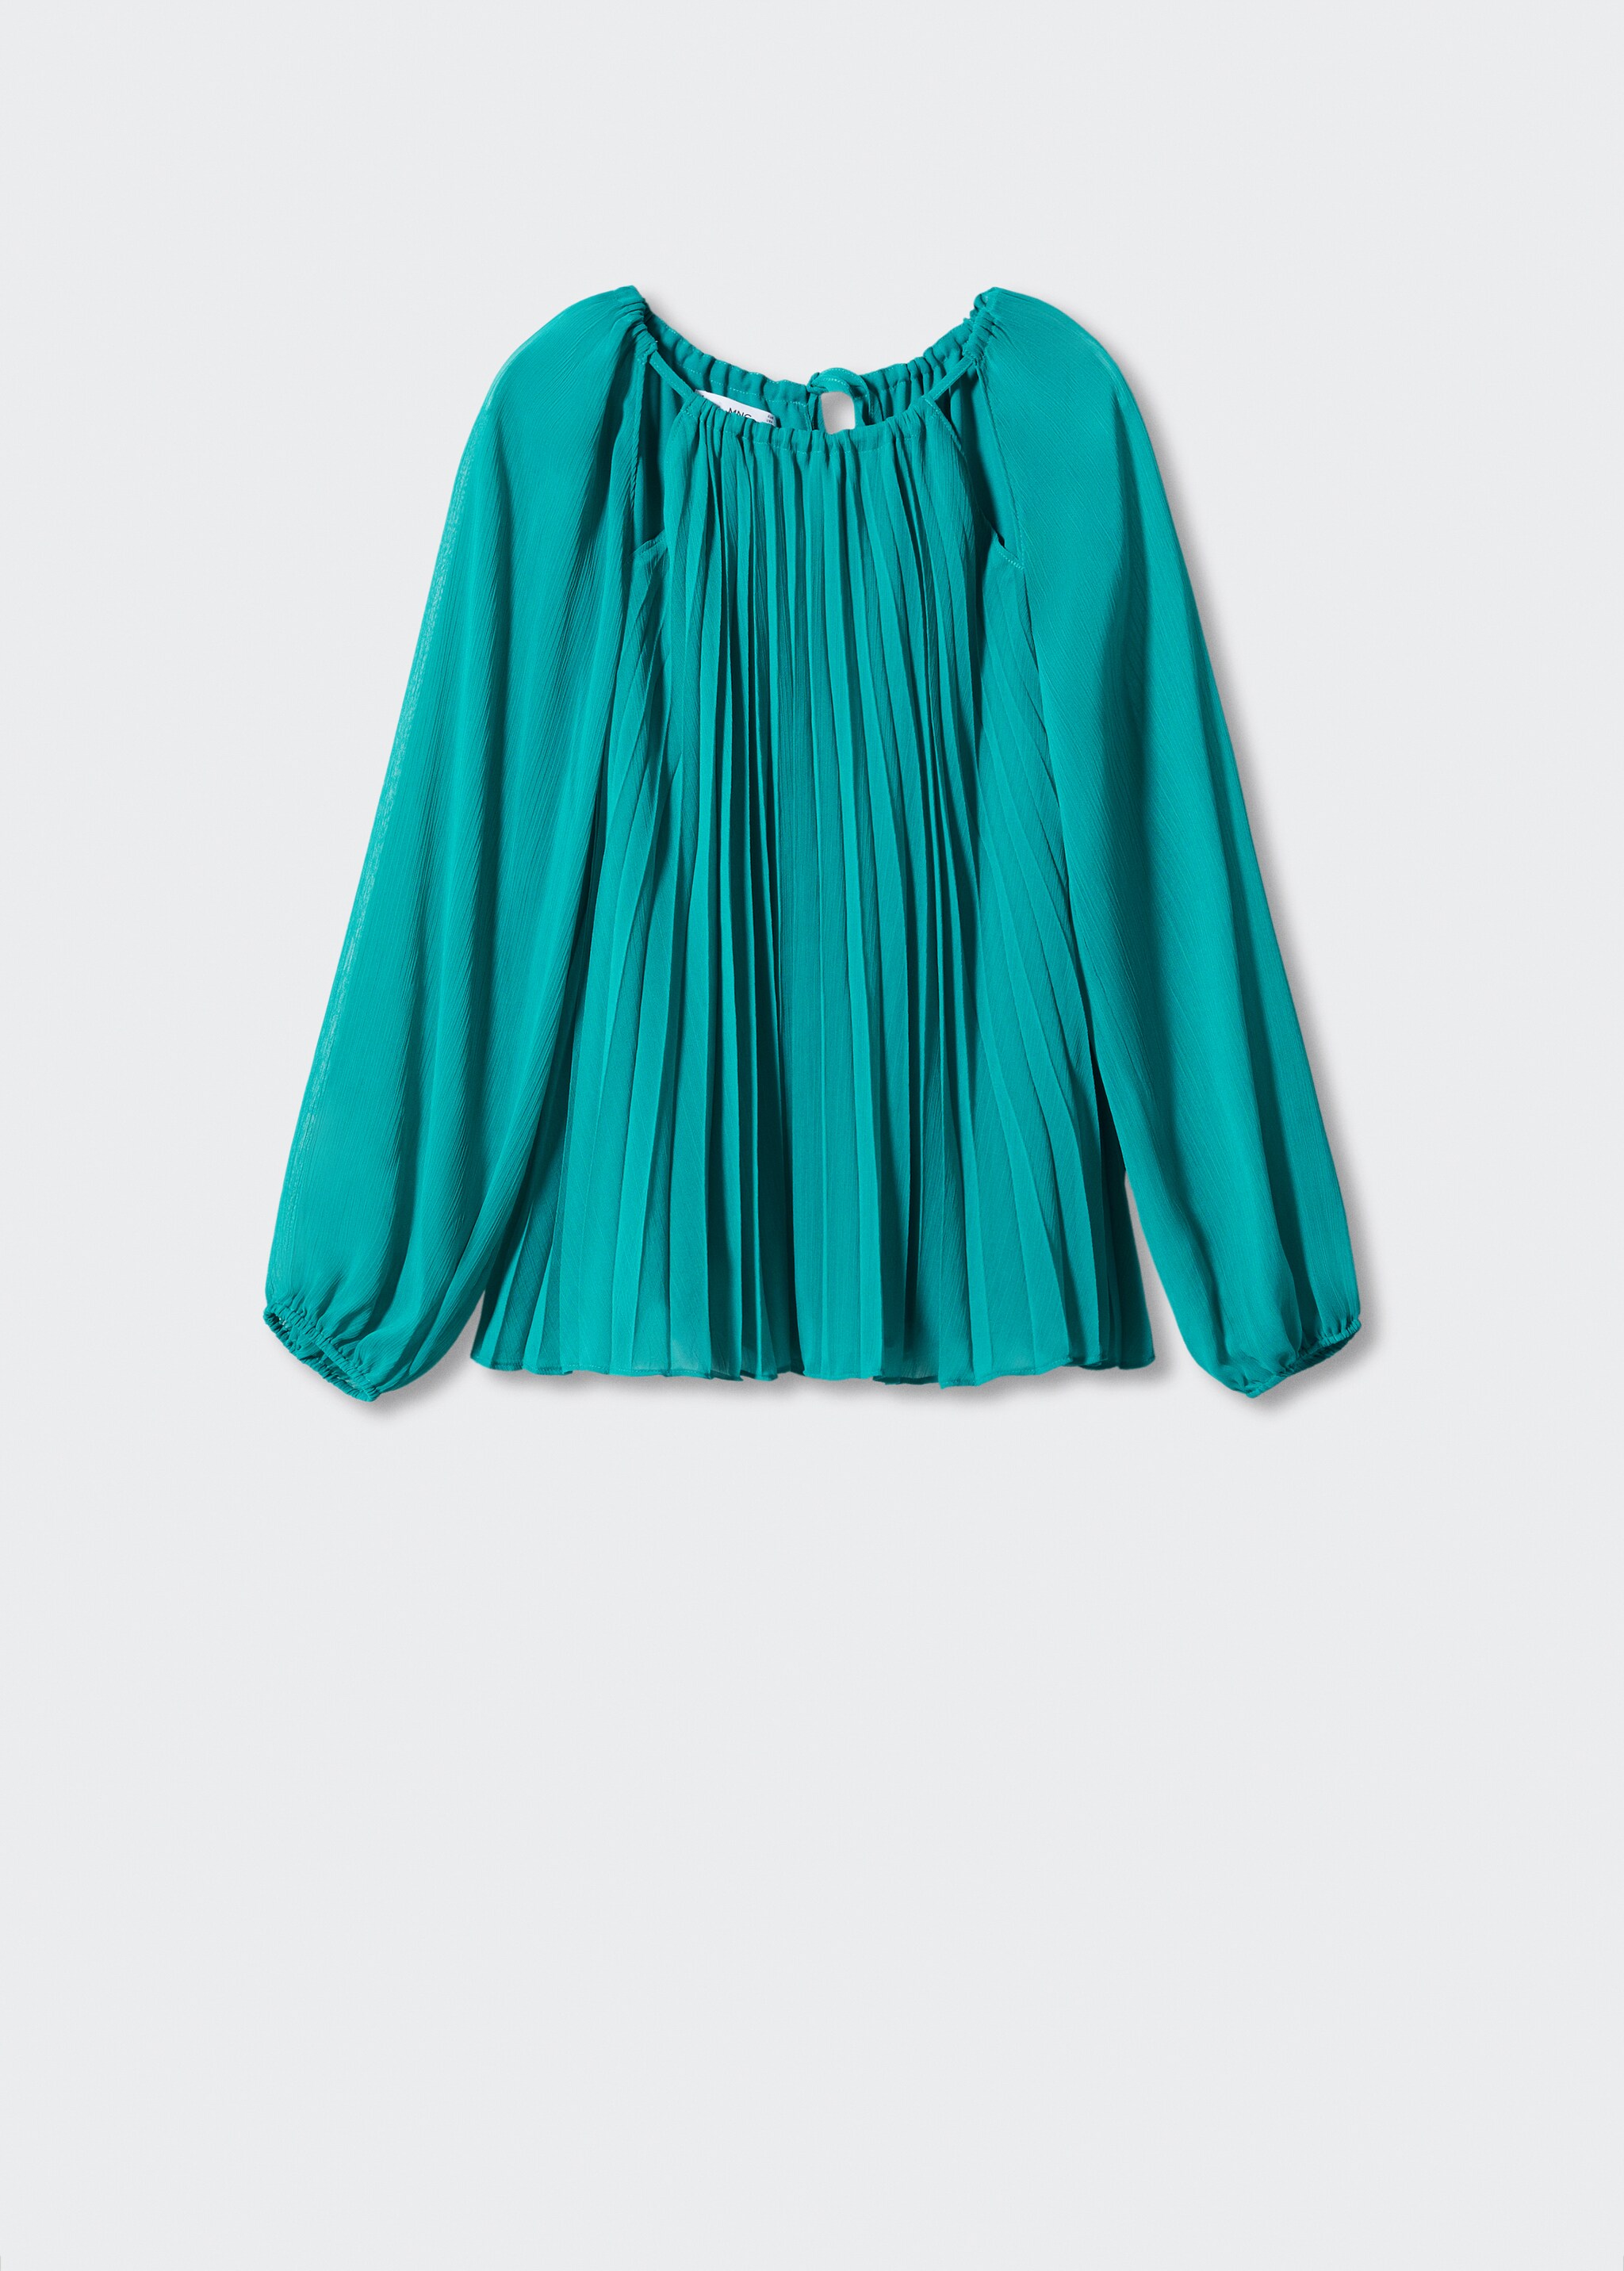 Pleated off-the-shoulder blouse - Article without model